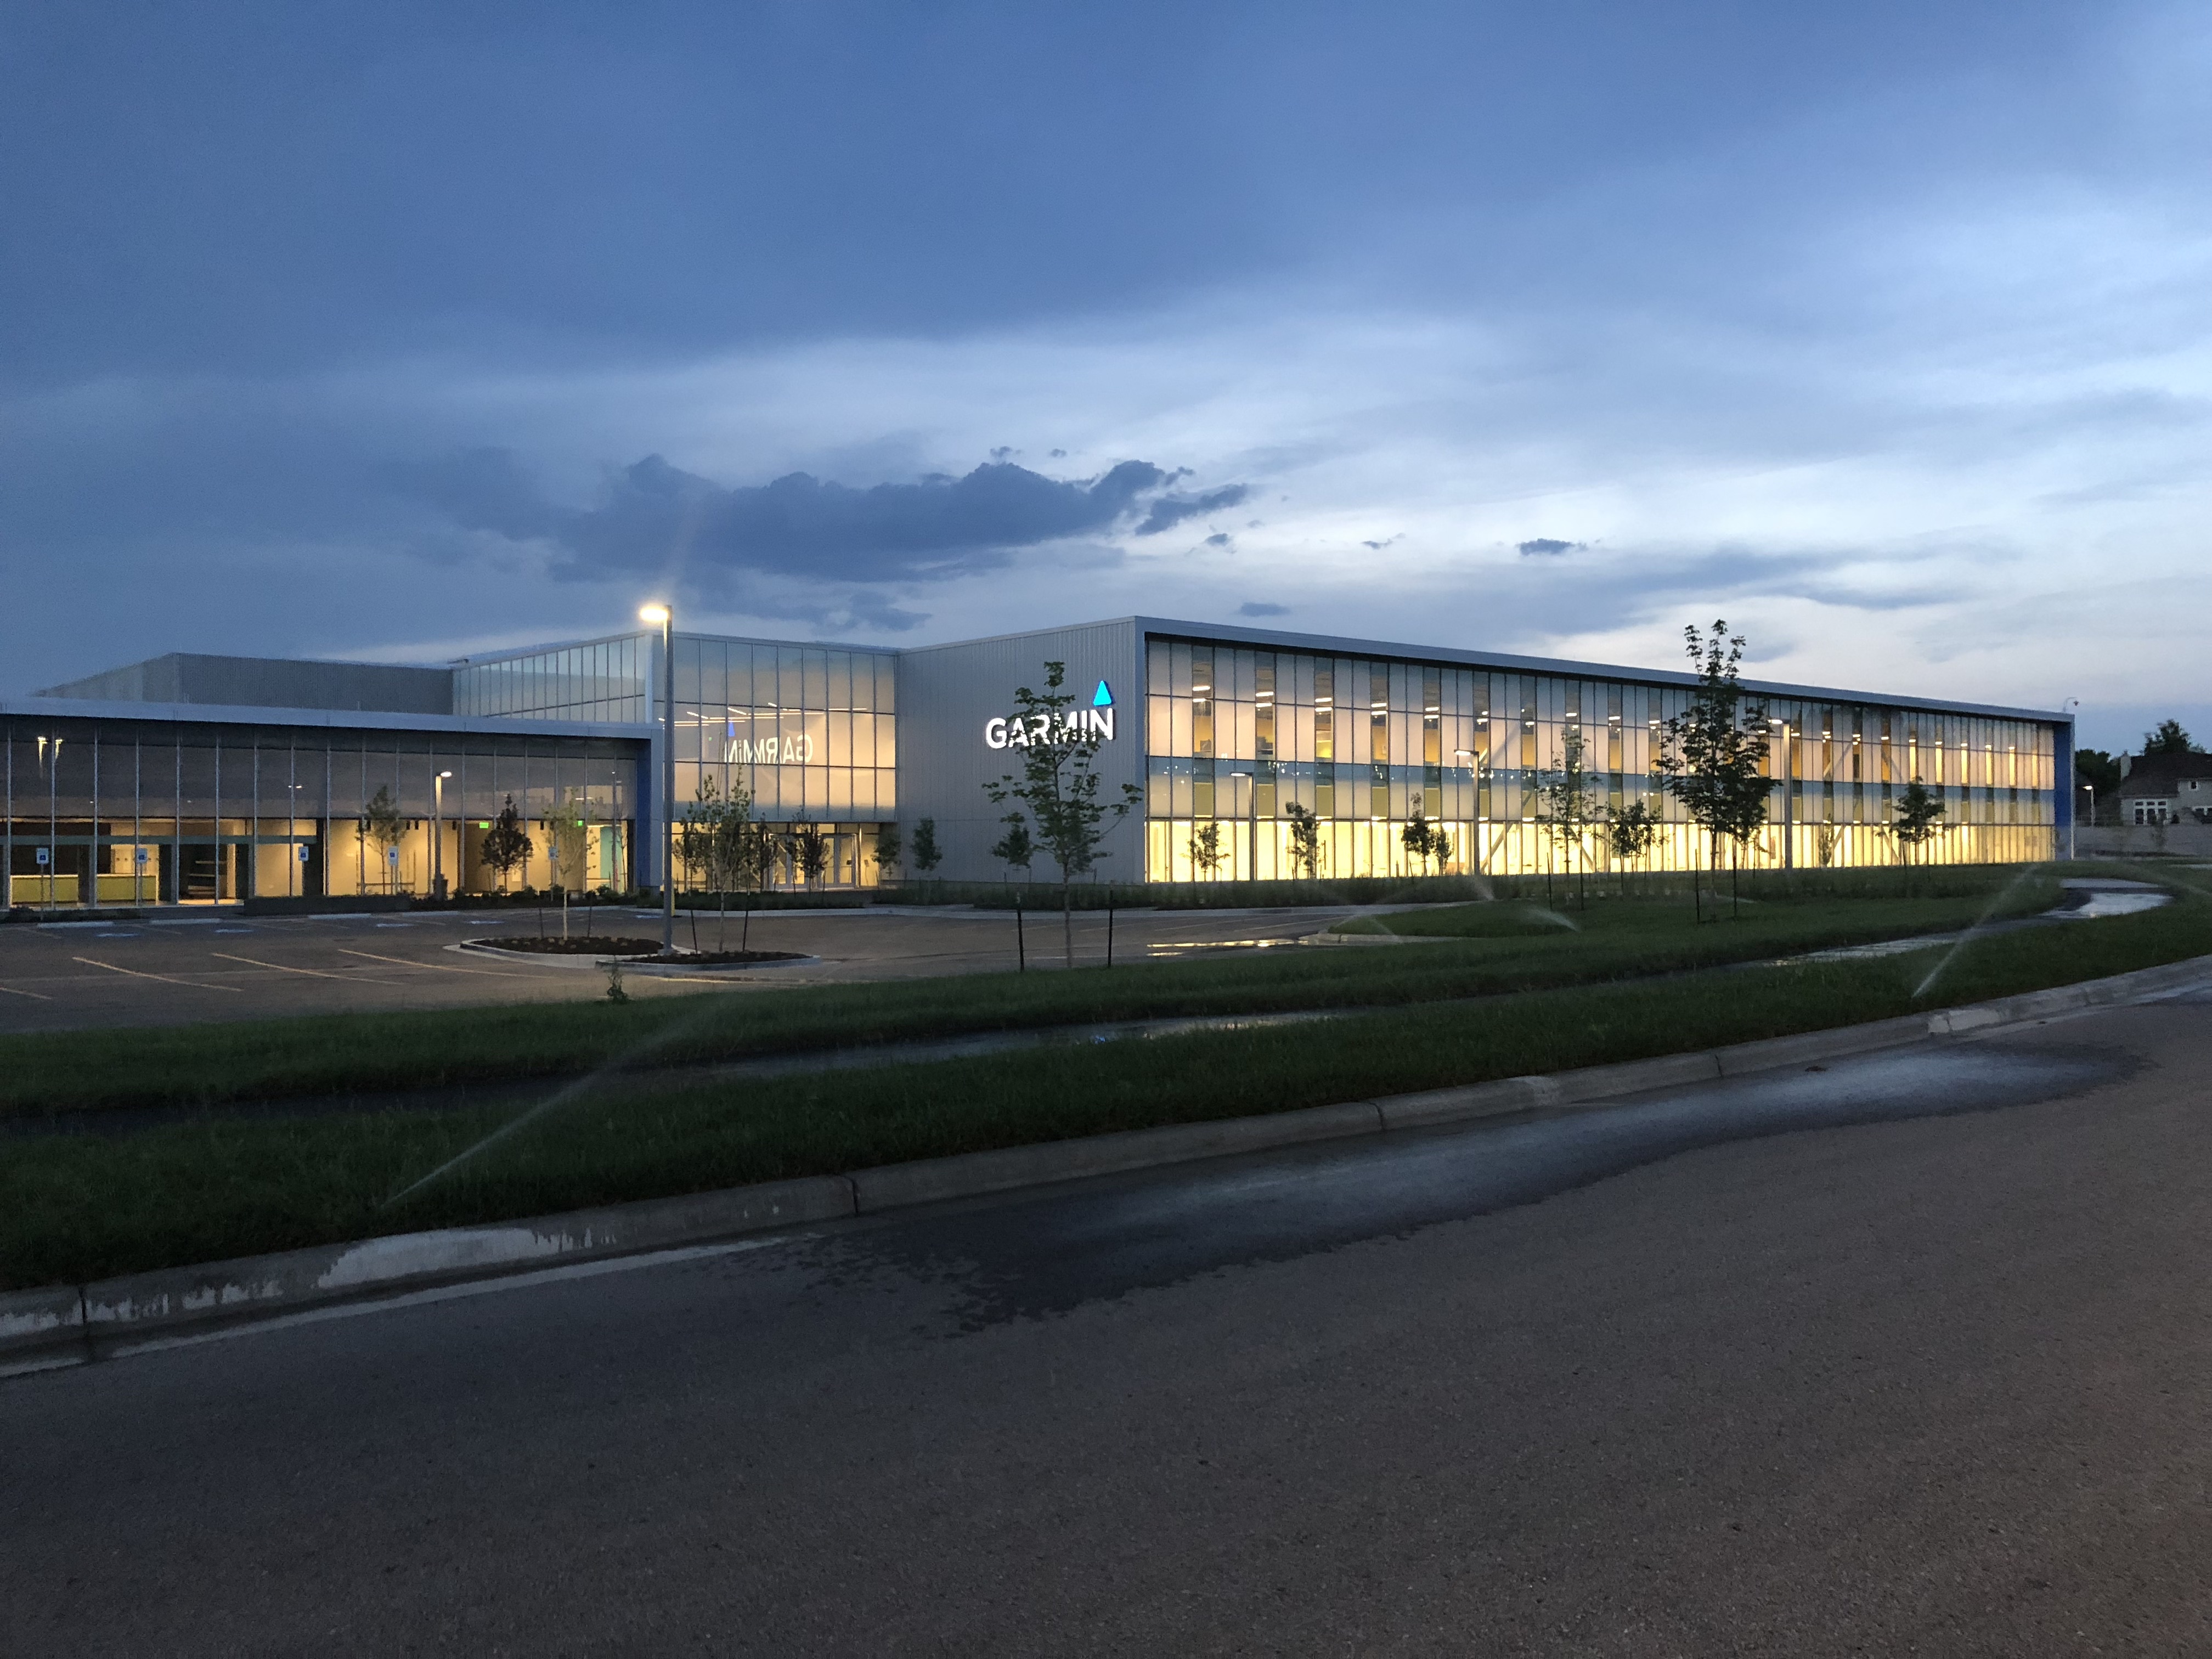 Garmin® growth continues accelerate as the company celebrates 200 million products sold and opens its Olathe campus expansion | Business